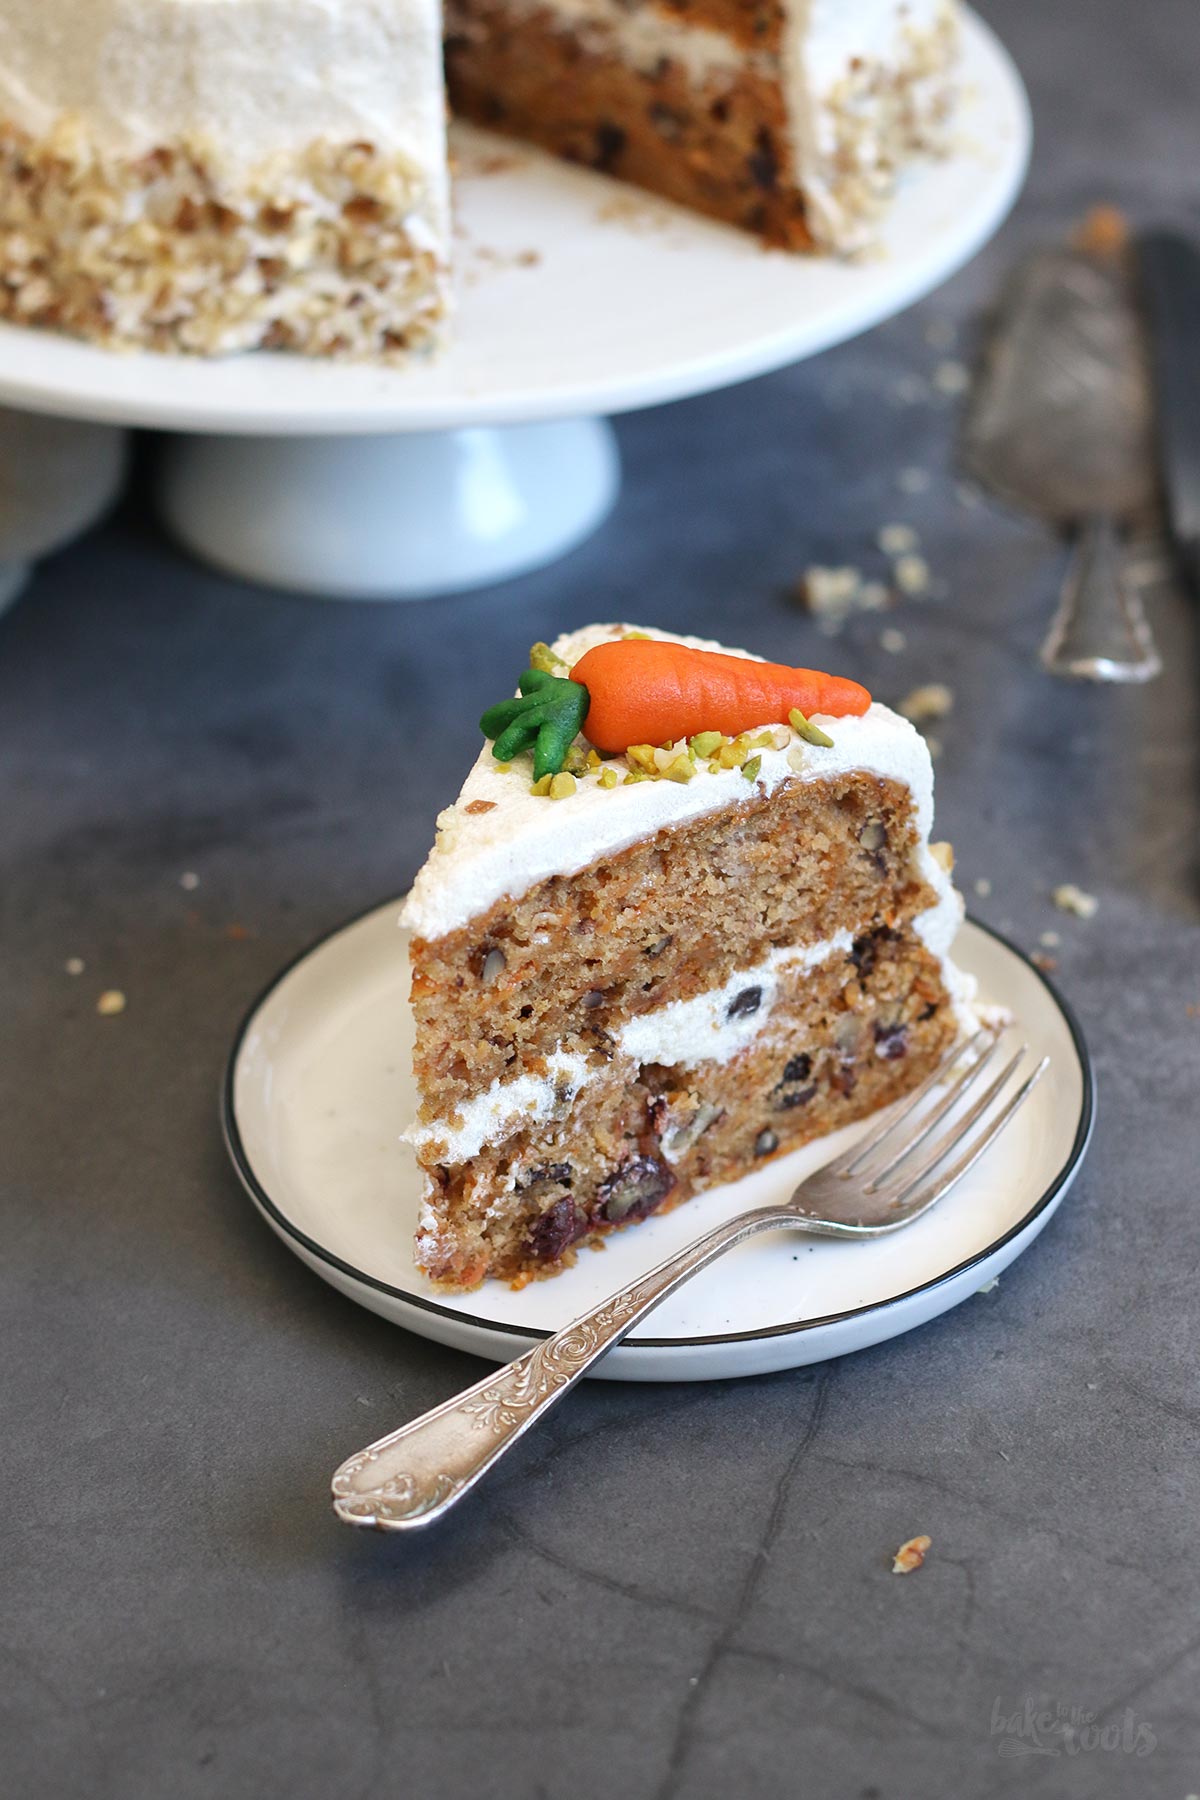 Veganer Carrot Cake mit "Cream Cheese" Frosting | Bake to the roots